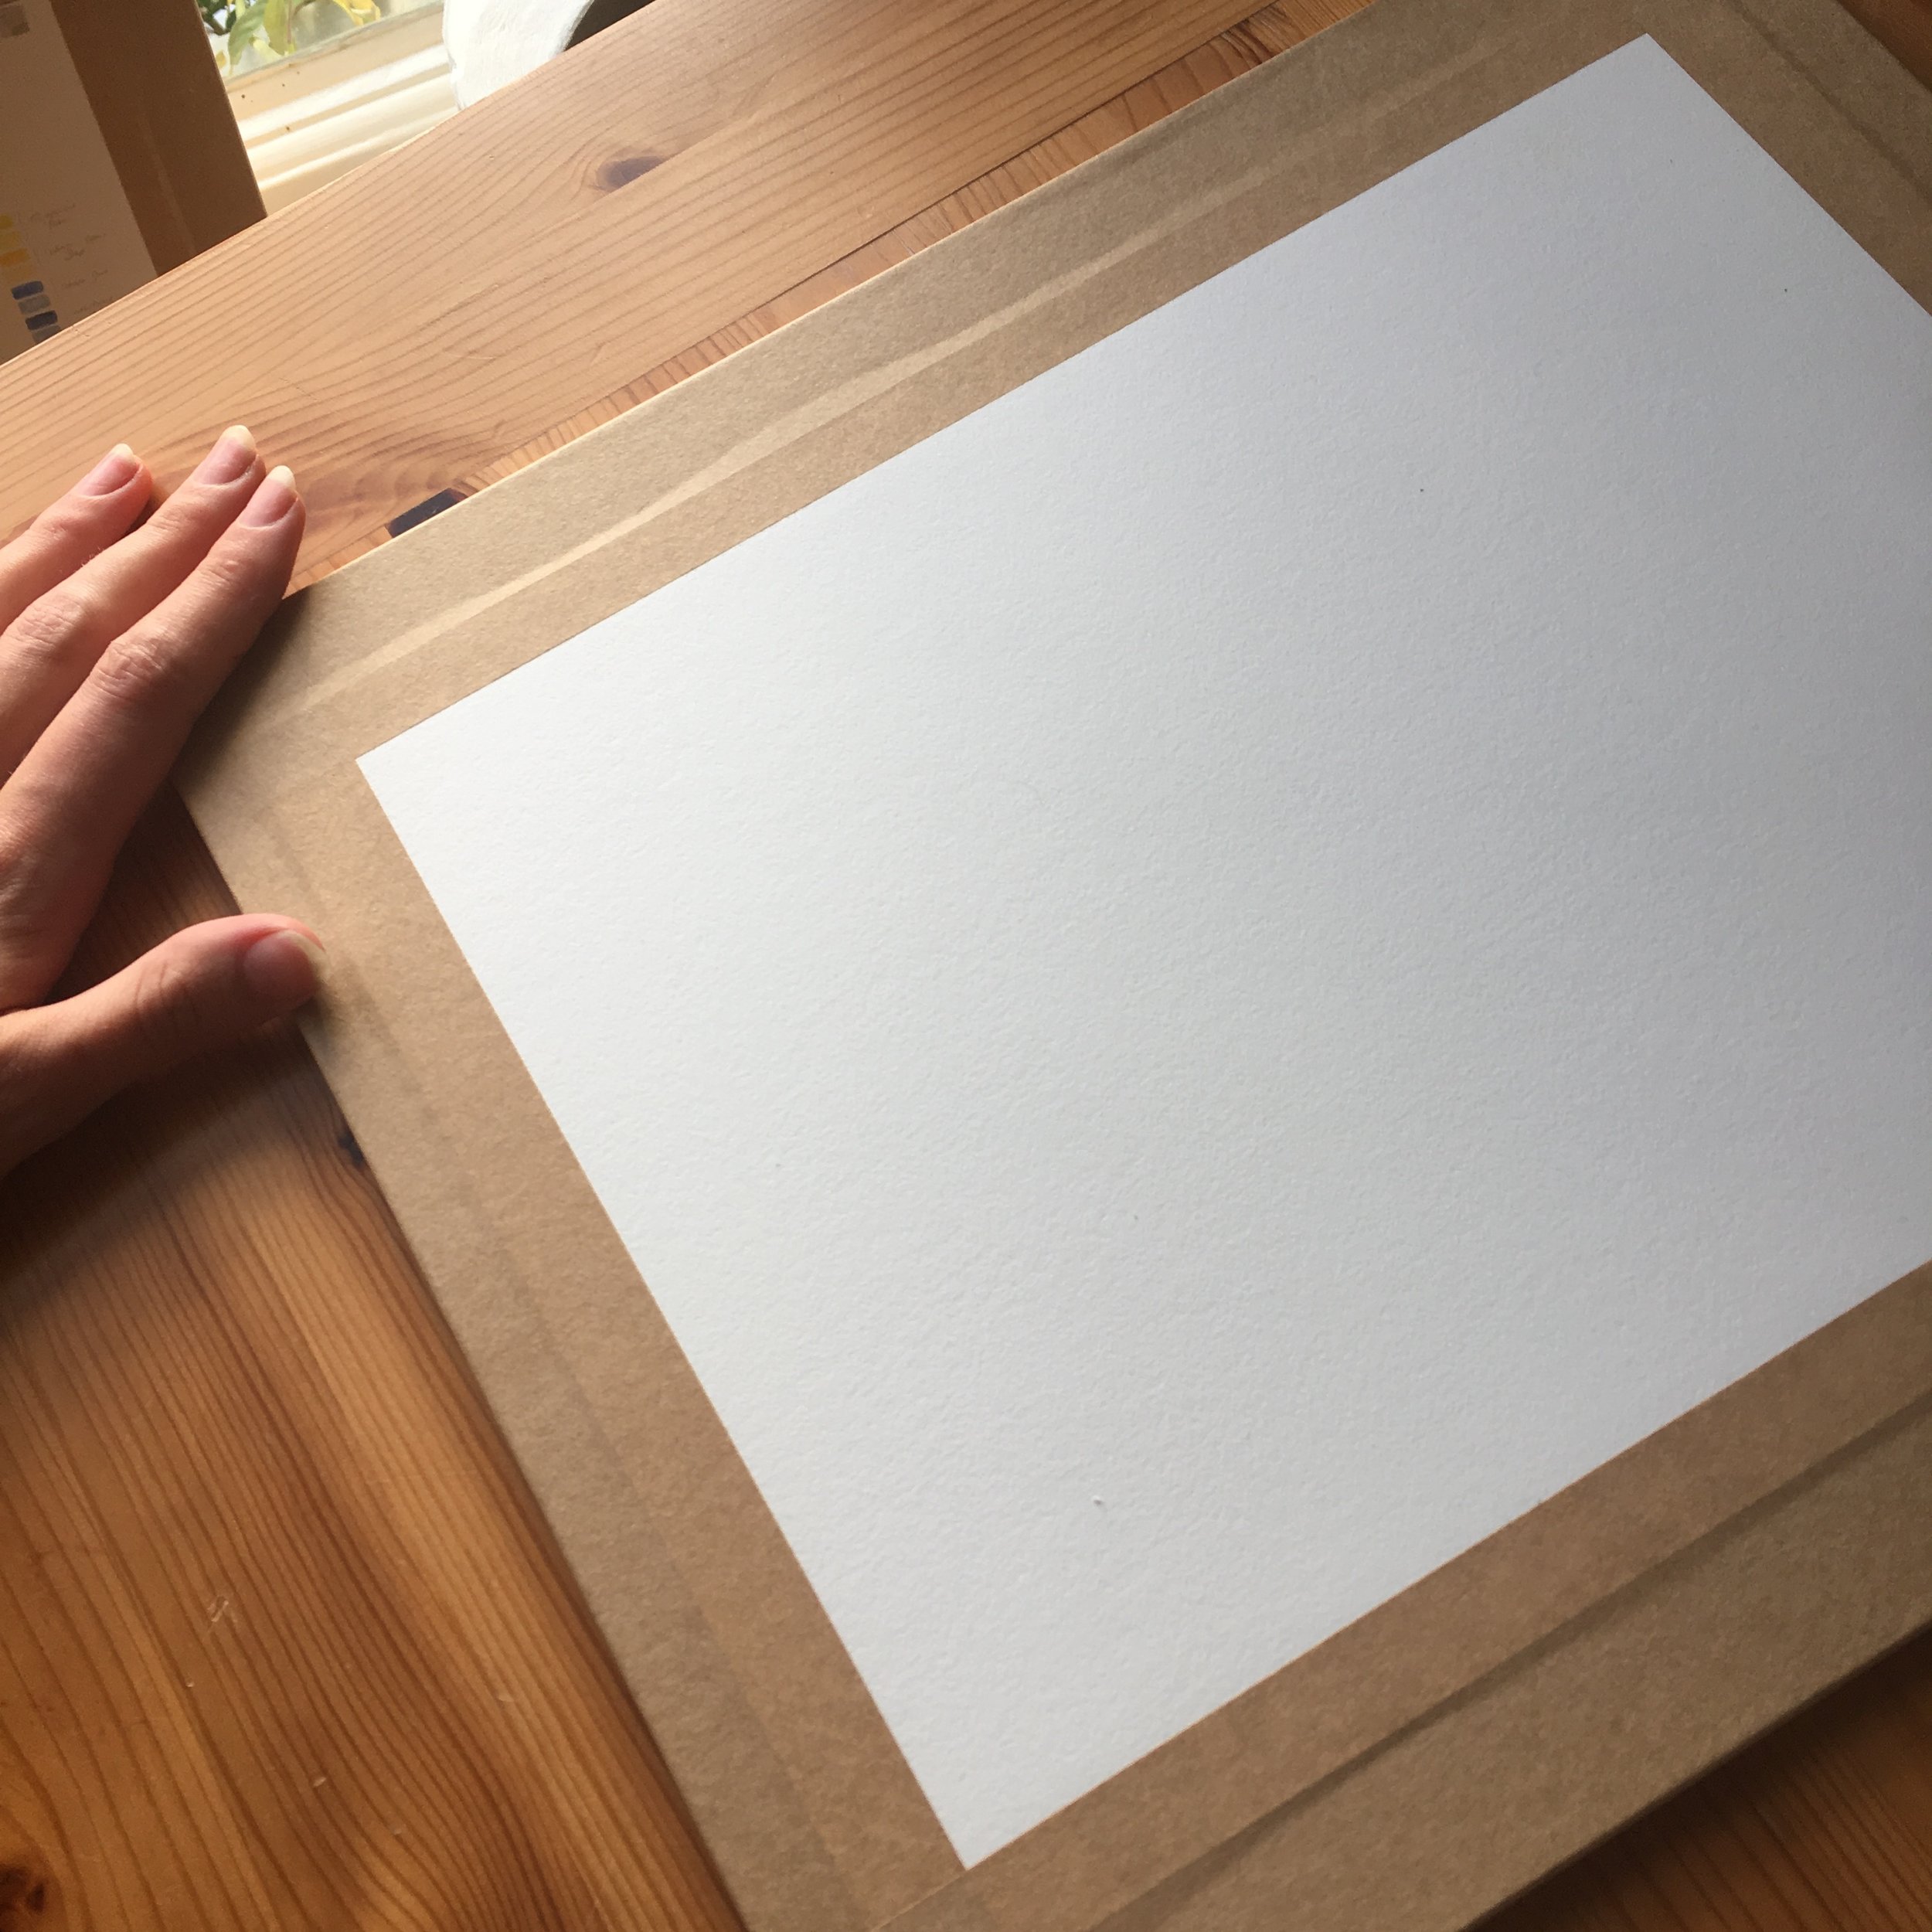 Stretching Watercolour Paper for a Better Painting Experience